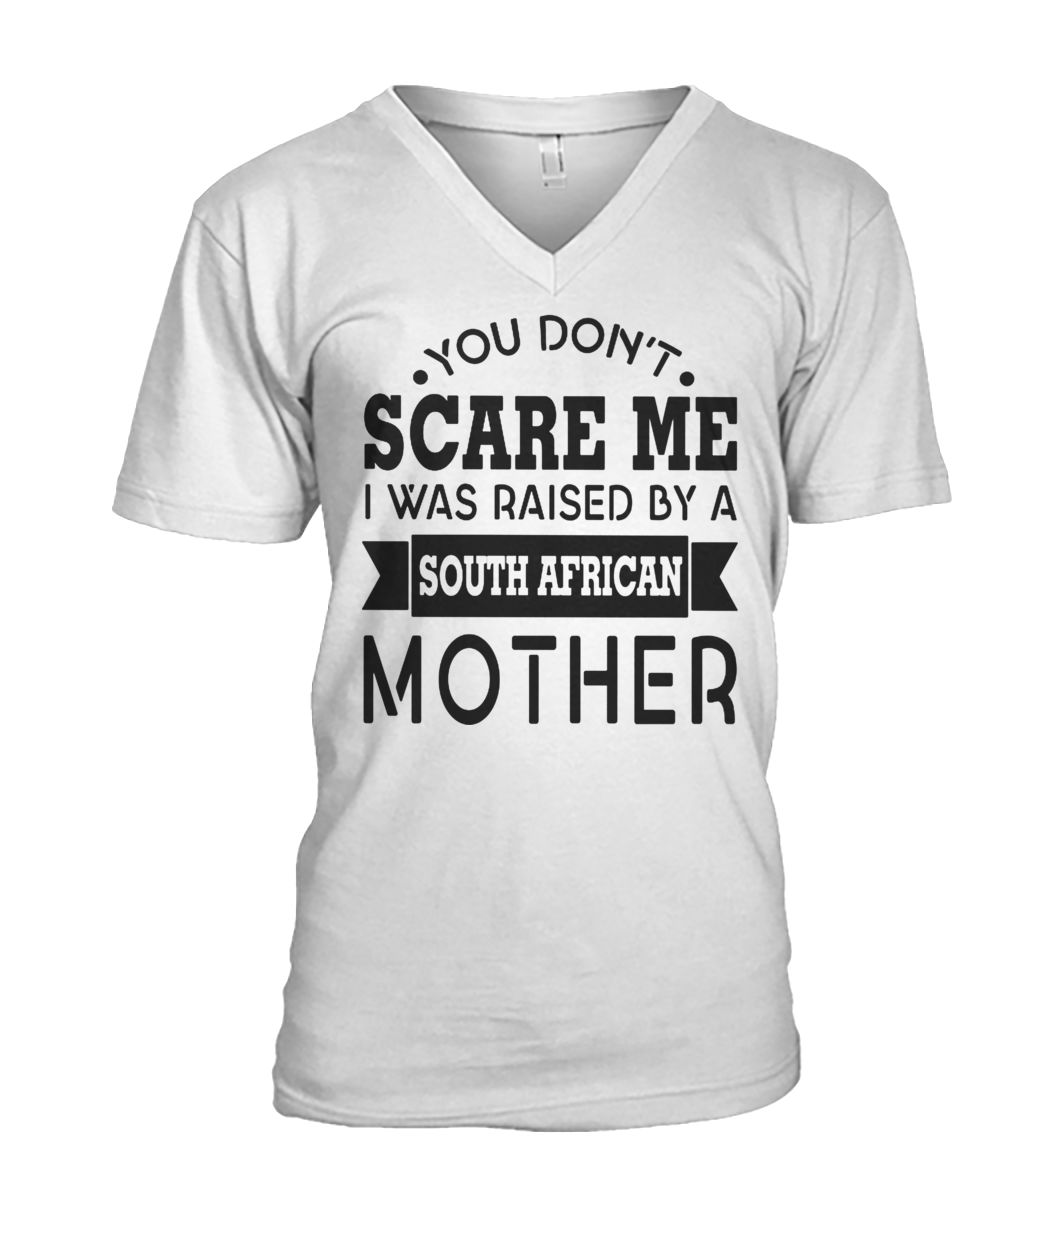 You don't scare me I was raised by a south african mother mens v-neck